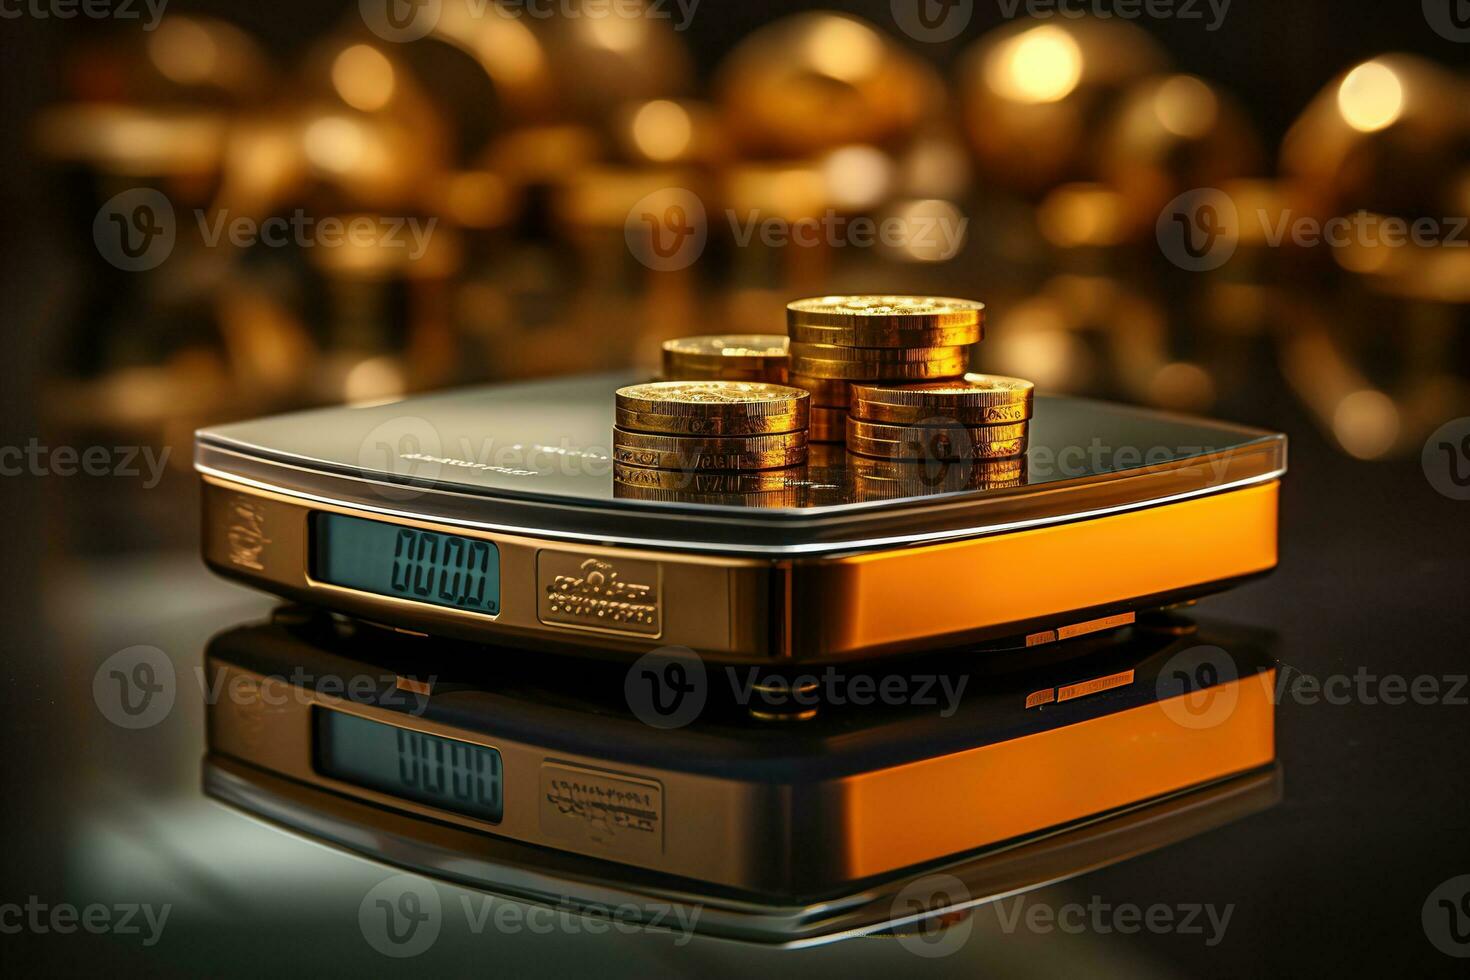 Electronic scales with gold coins on them stand on the table, blurred background. Generated by artificial intelligence photo